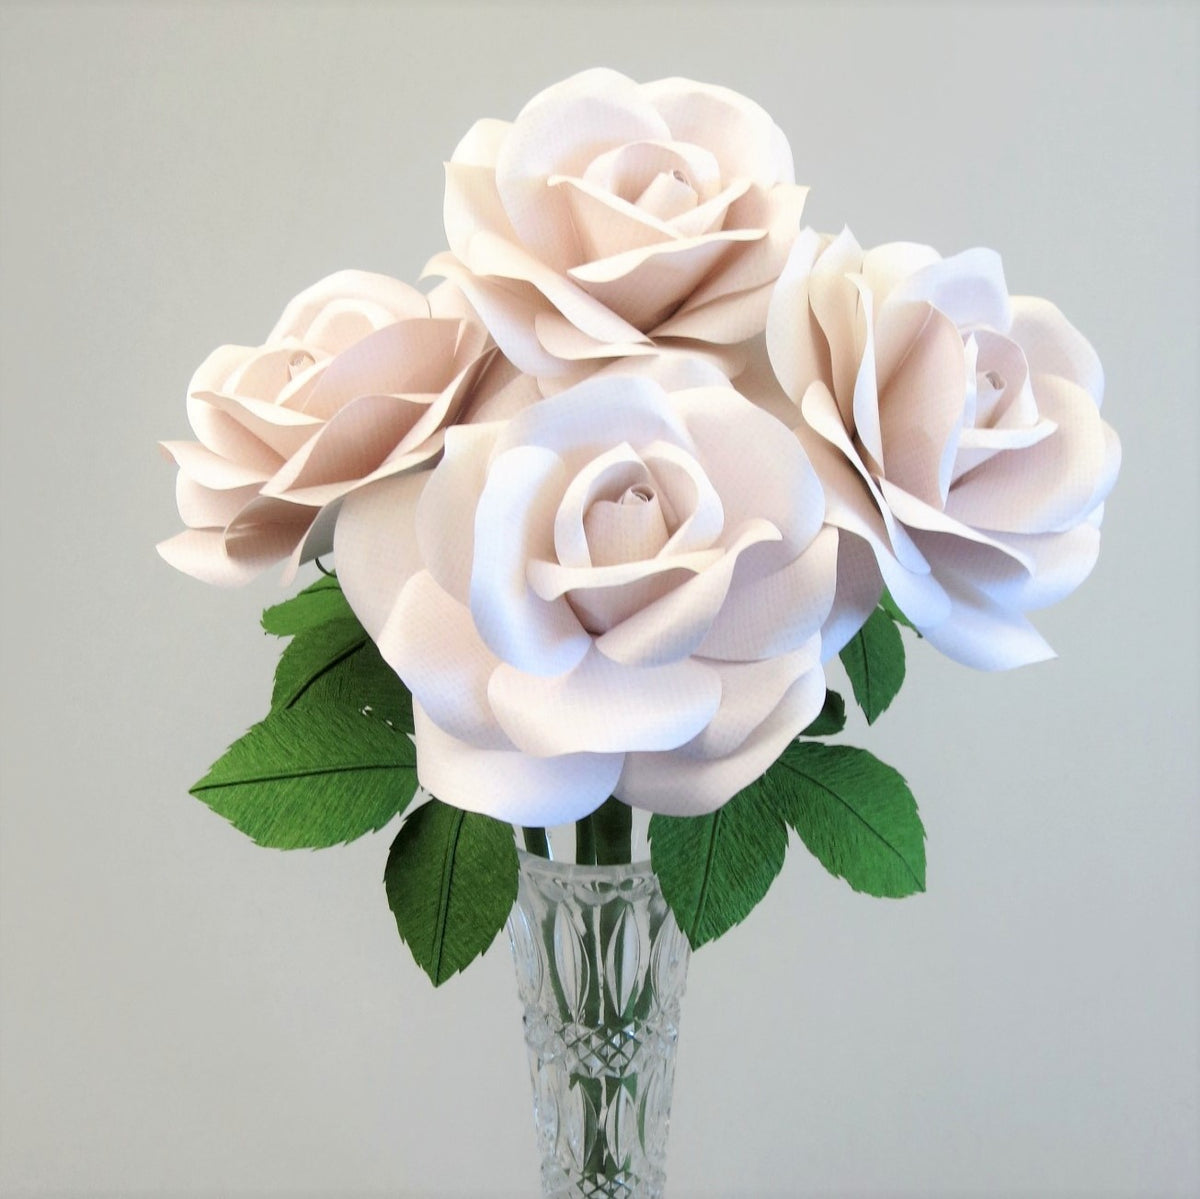 Bouquet of four white linen grain paper roses sitting tightly in a crystal vase with some ivy green leaves showing, set against a light grey background